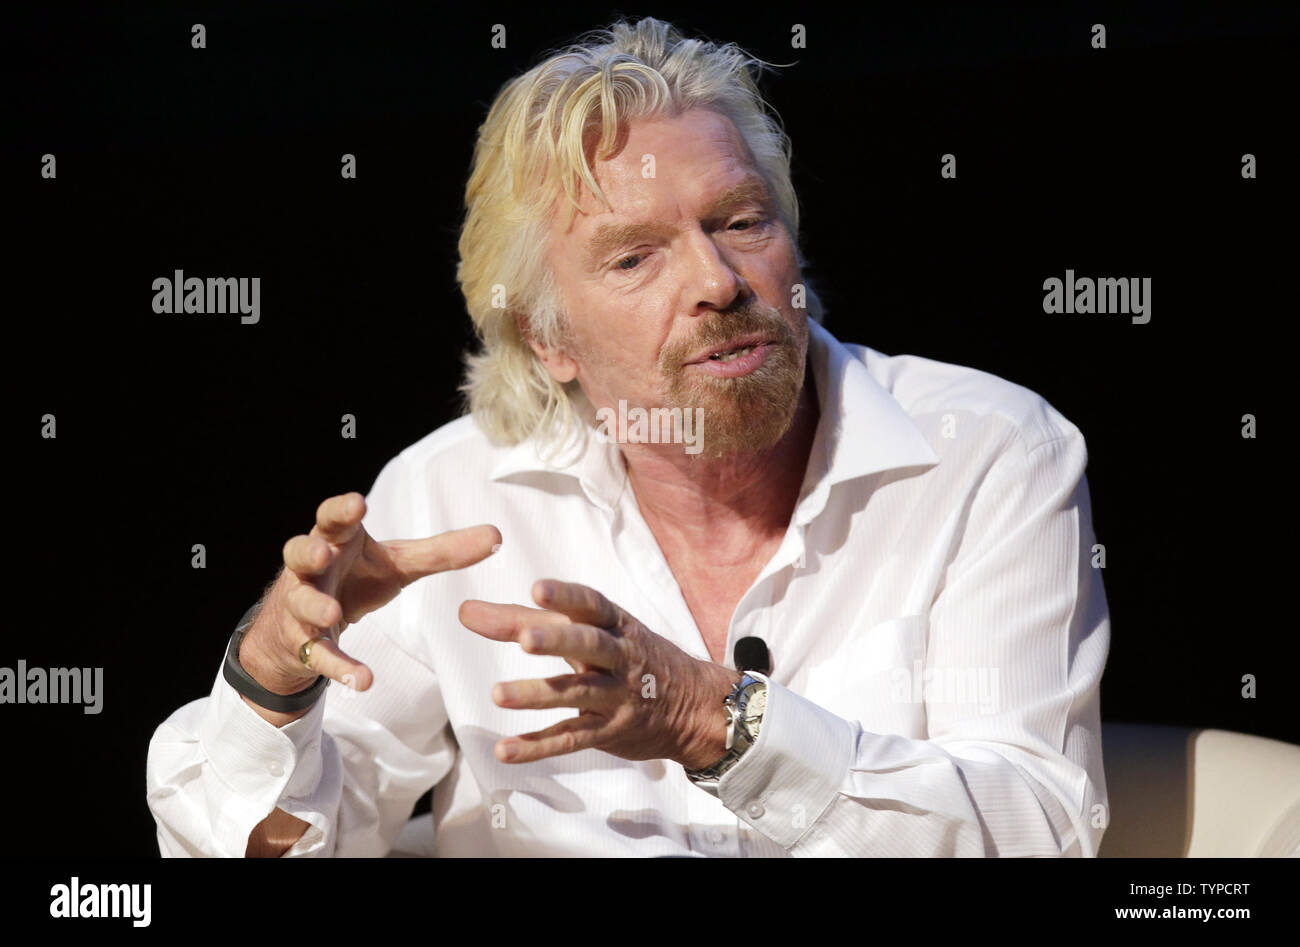 CEO and Founder of Virgin Group Sir Richard Branson speaks at a 'Climate Week NYC' event at the Morgan Library and Museum in New York City on September 22, 2014. 'Climate Week NYC' events are scheduled to continue through Sunday, September 28 and coincide with the U.N.'s 2014 Climate Summit.     UPI/John Angelillo Stock Photo